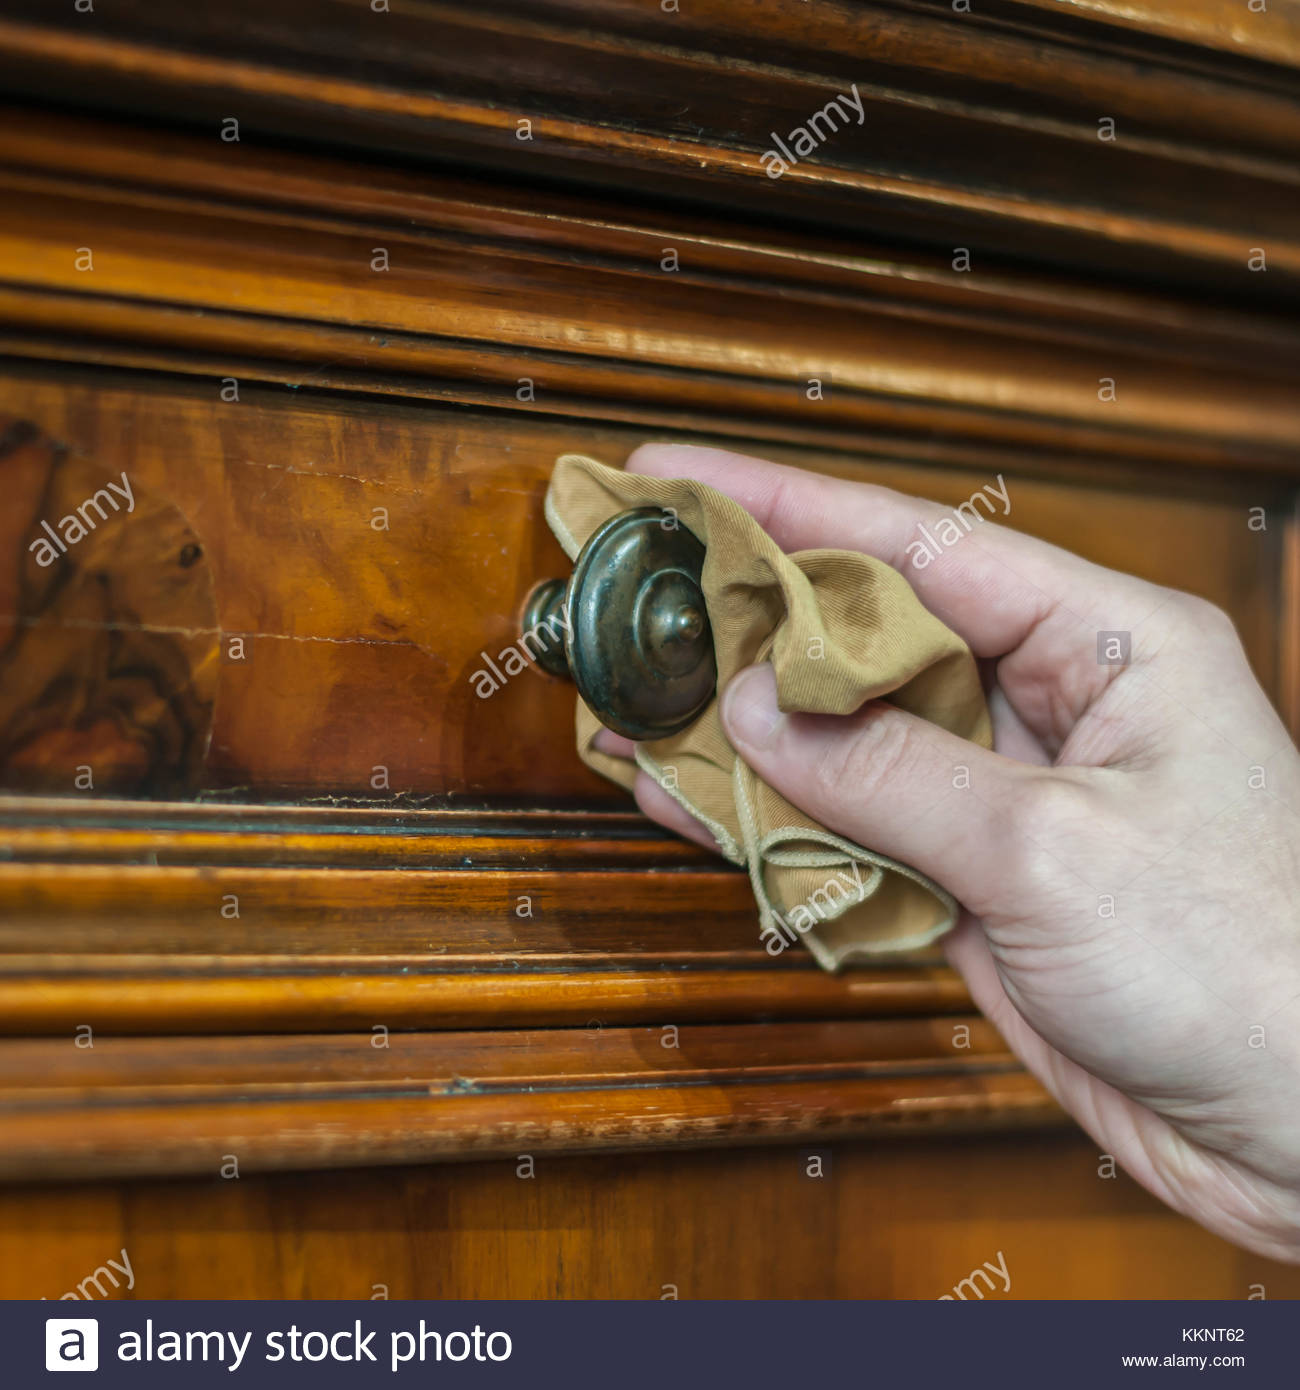 Antique Furniture Cleaning Stockfotos Antique Furniture Cleaning